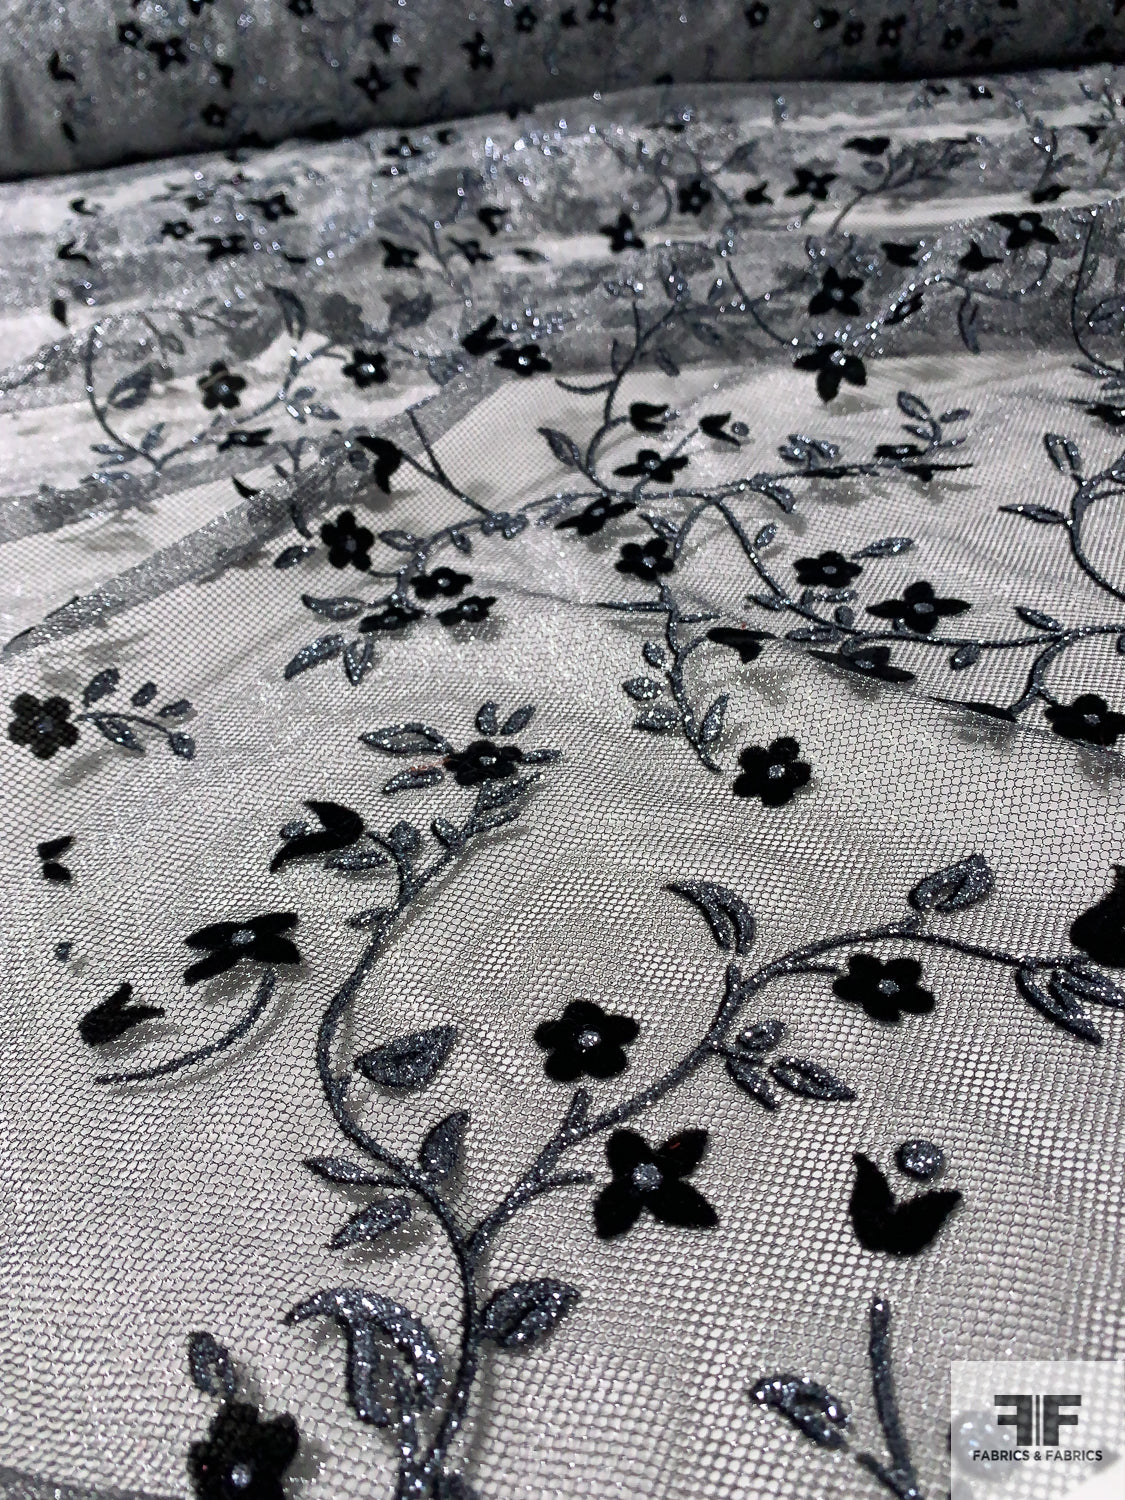 Made in France Floral Flocked Metallic Tulle with Glitter Detailing - Grey / Silver / Black